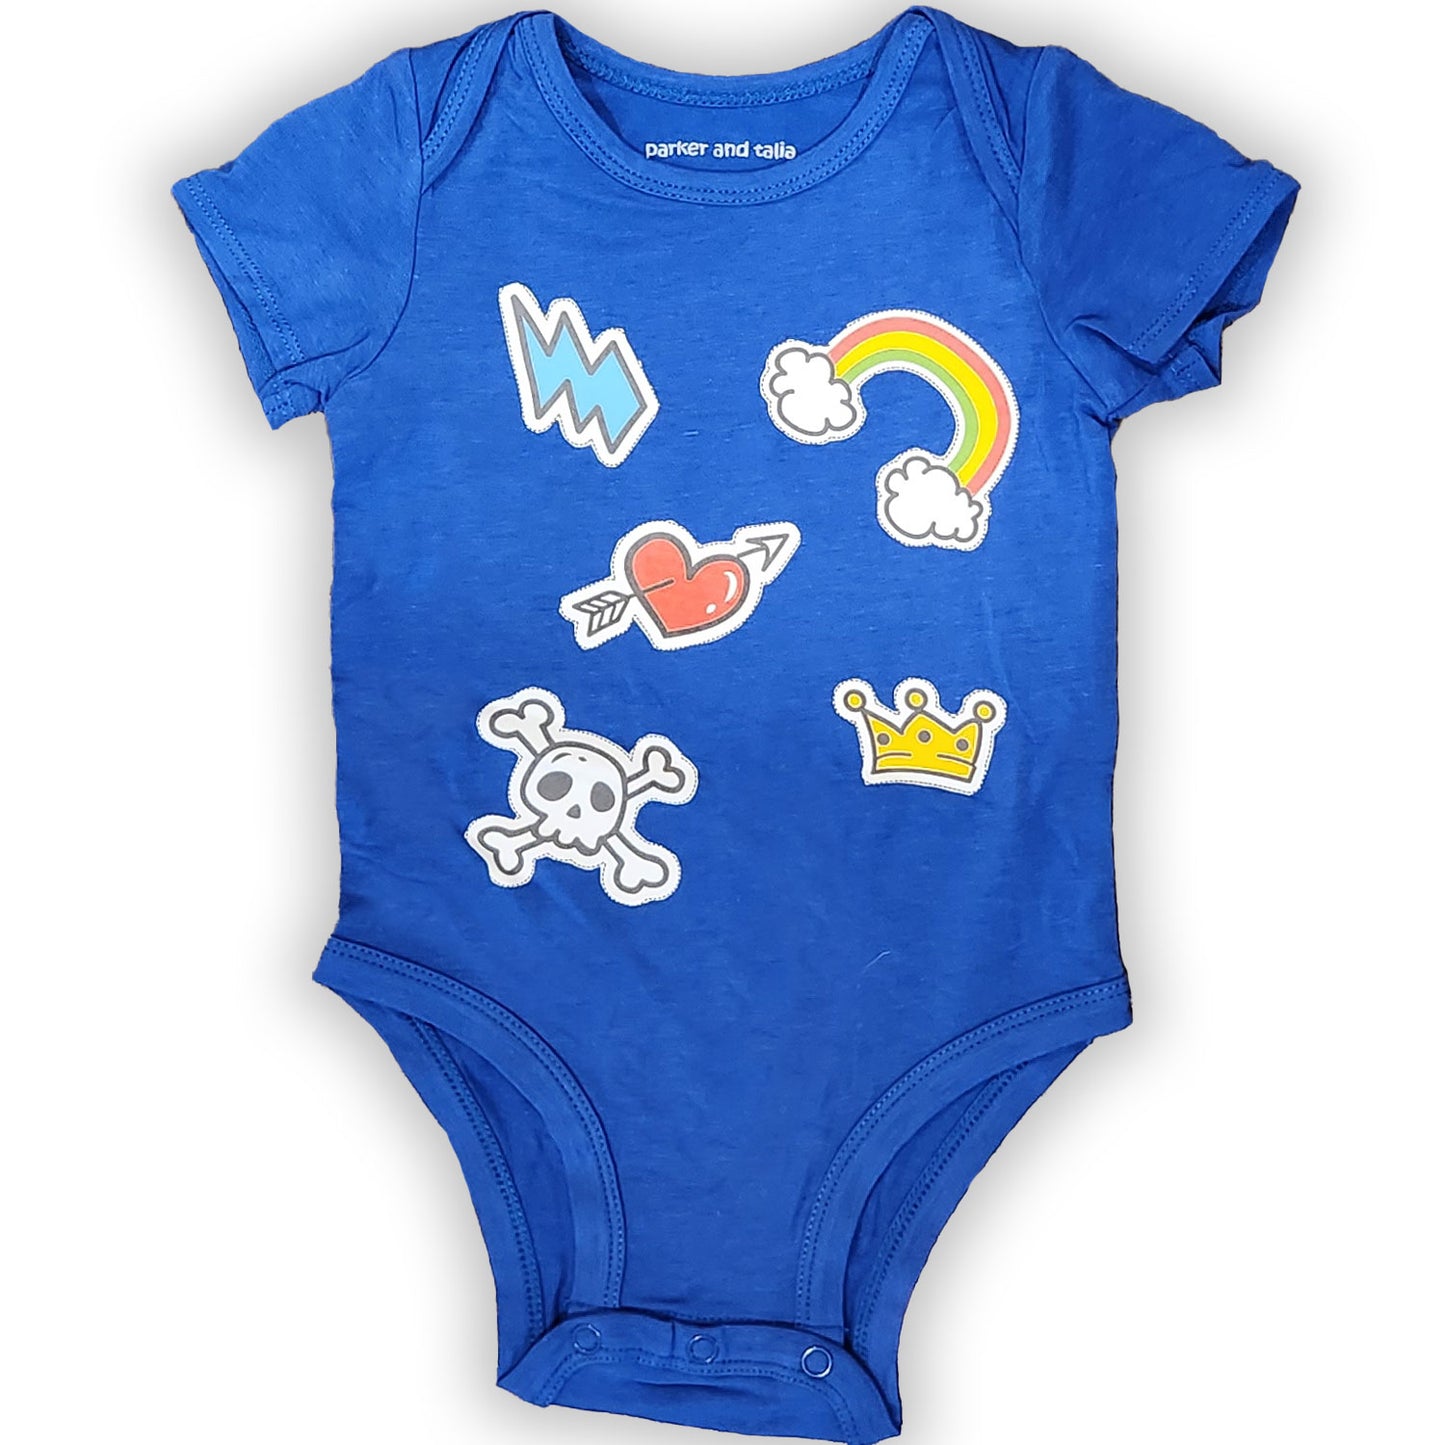 The Everyday Graphic Baby Onesie: Rockstar Patches